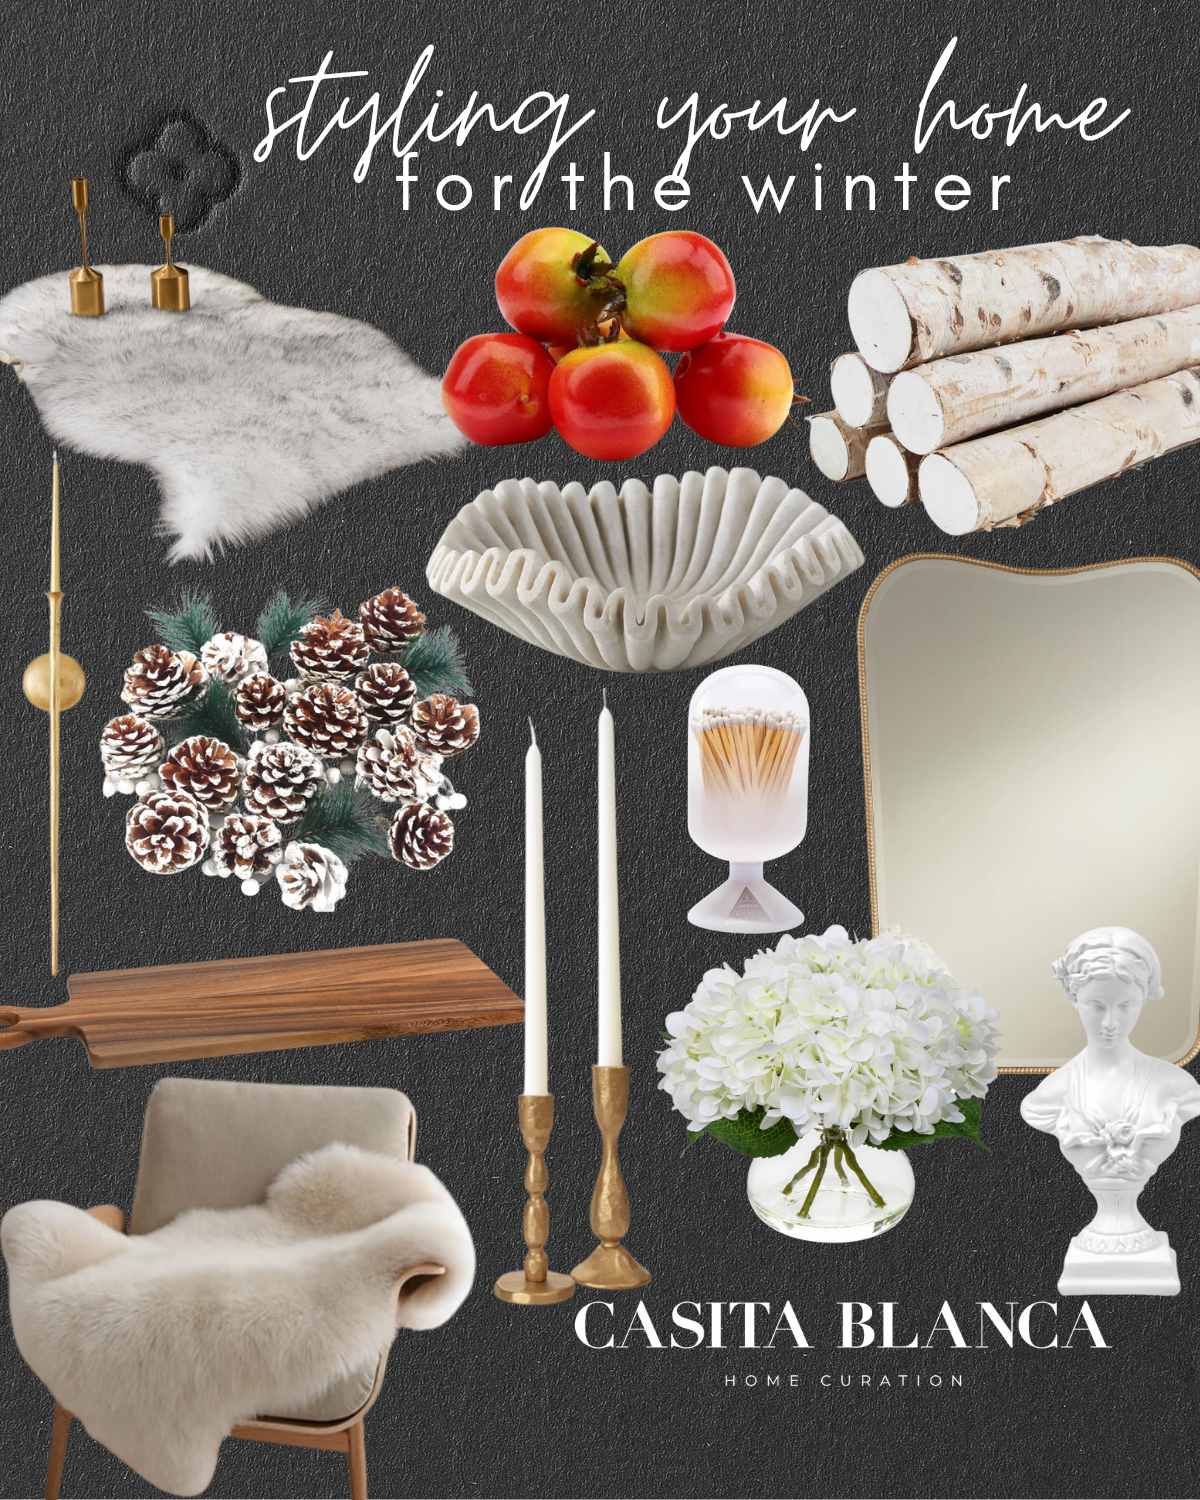 tips for styling your home during the winter months | home, home styling, winter months, winter season, winter decor, home decor, pomegranates, faux fur, mirror, florals, birch wood, grazing board, frosted